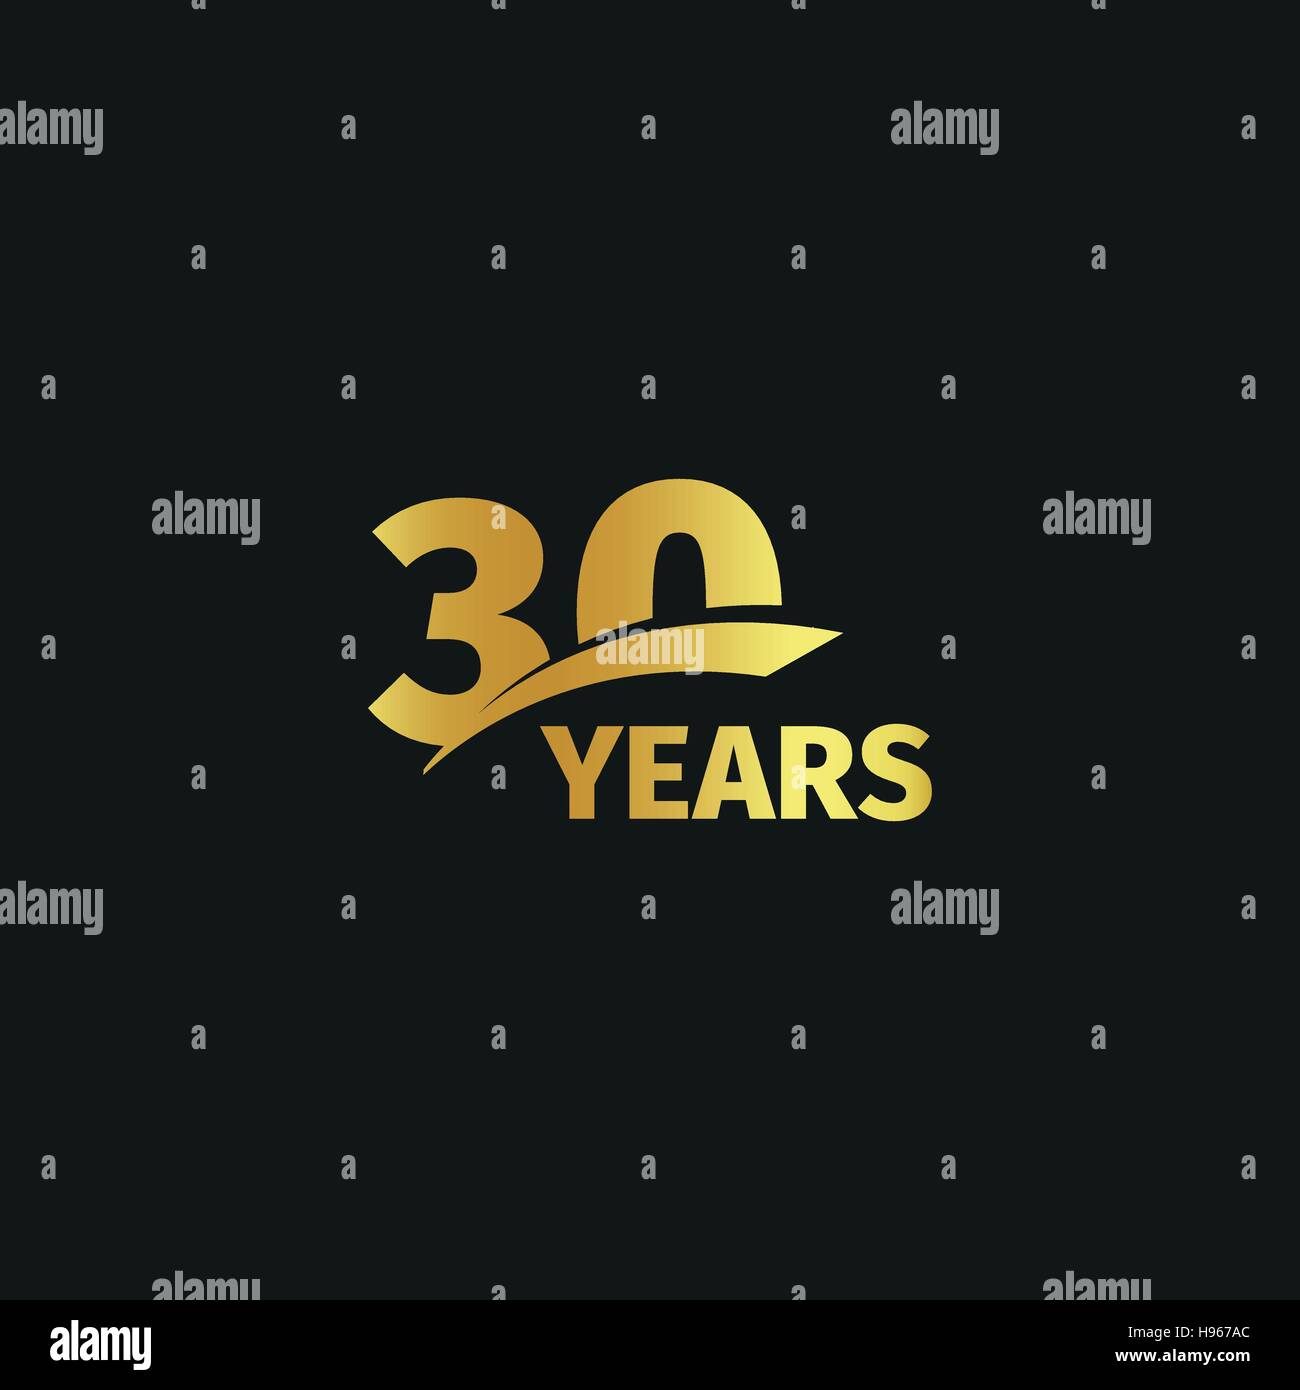 25 anniversary golden numbers isolated on black Vector Image